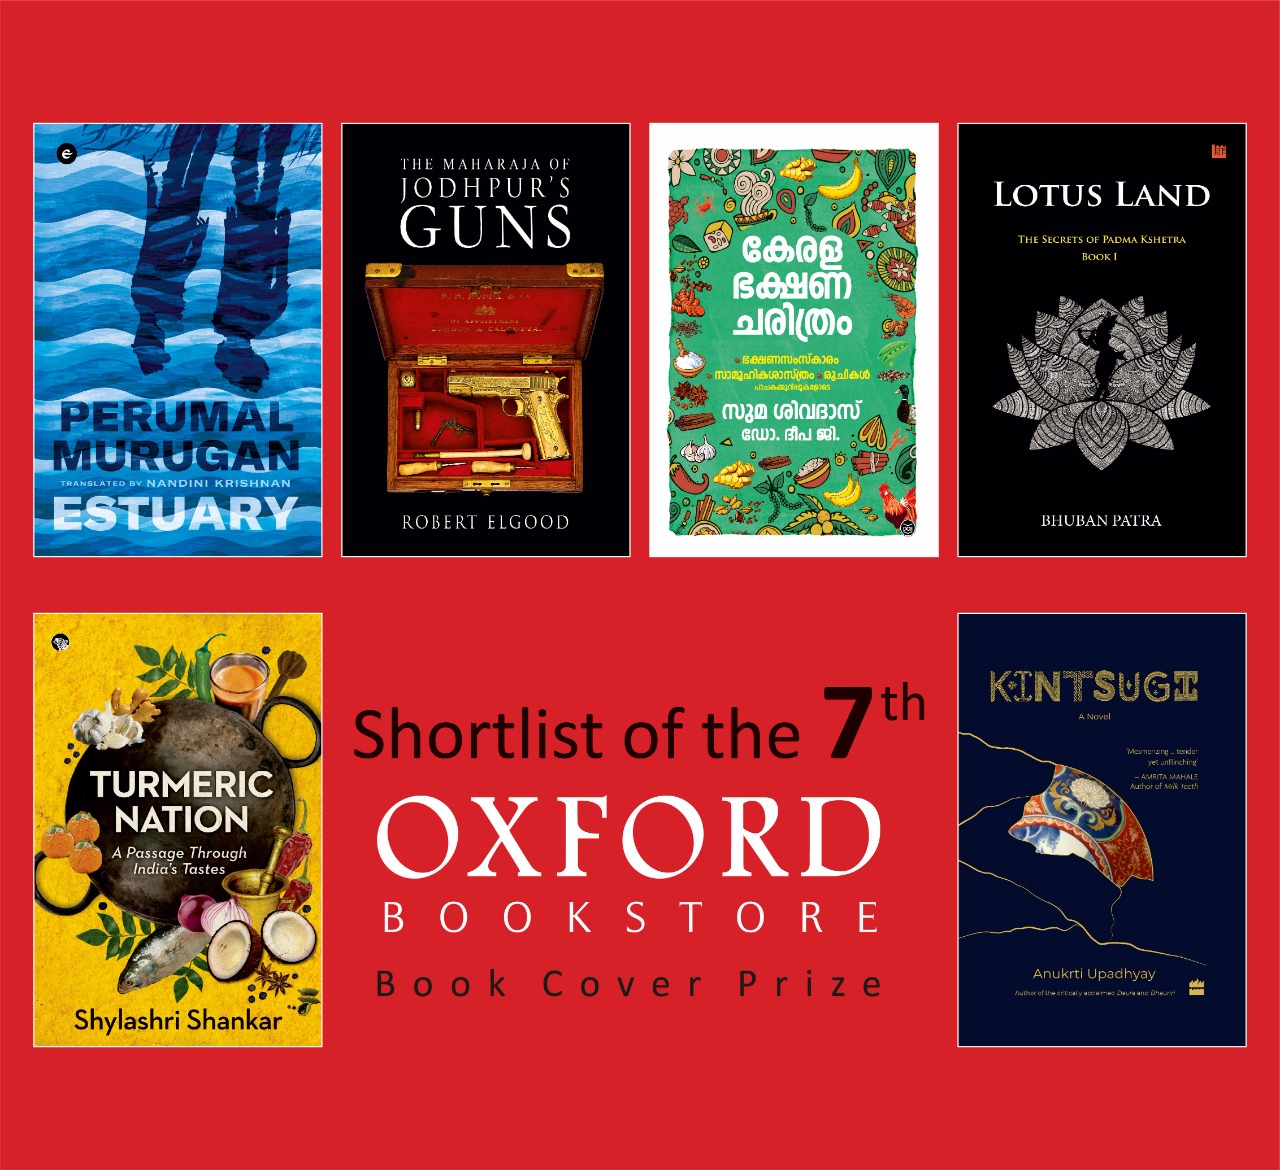 6 BOOK COVERS MAKE IT TO THE SHORTLIST OF OXFORD BOOKSTORE BOOK COVER PRIZE 2022